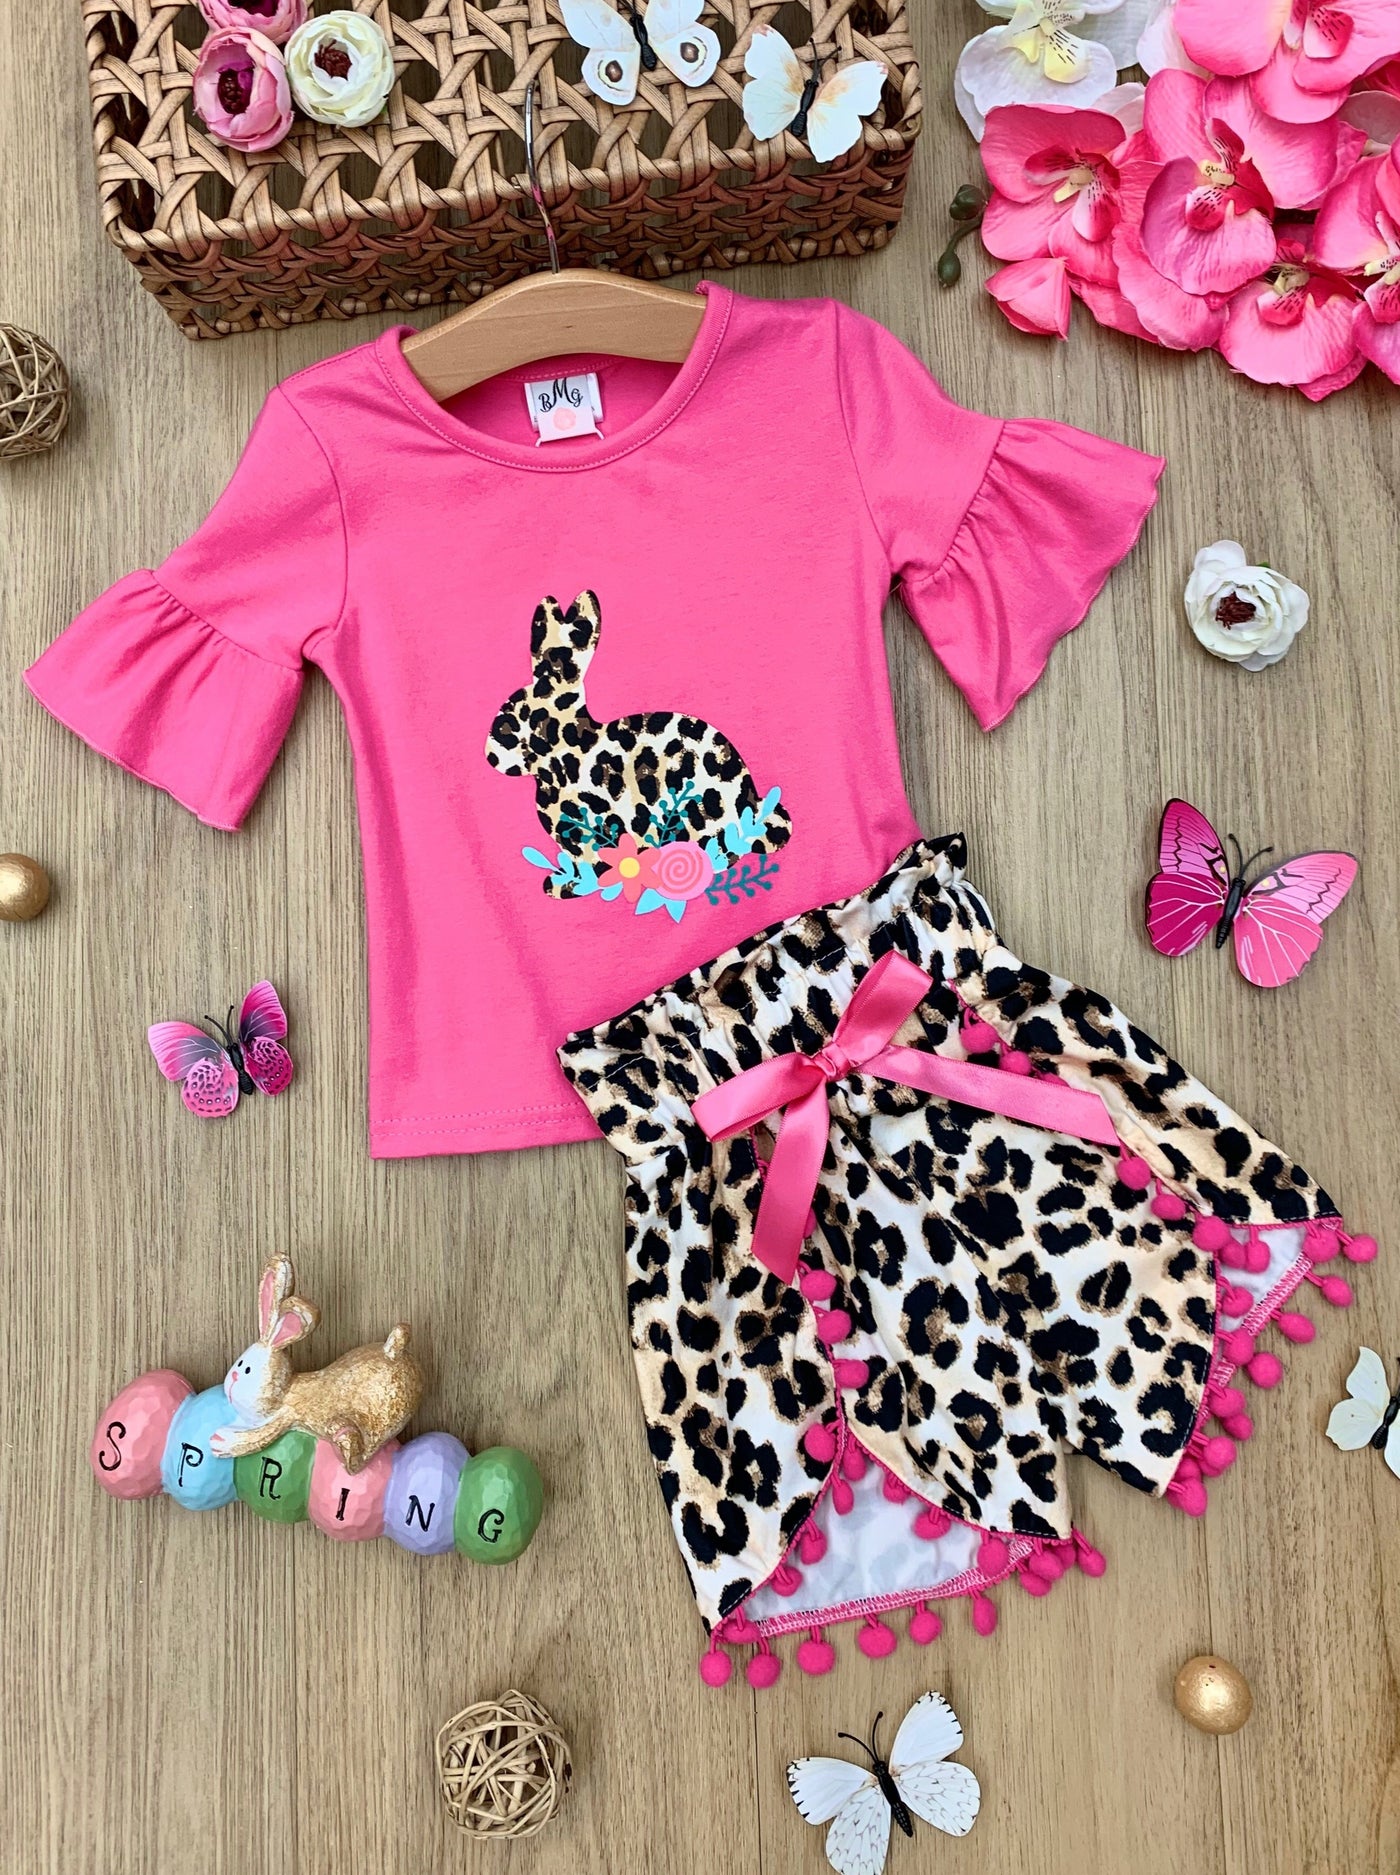 Easter set features hot pink top with short ruffle sleeves and leopard print bunny graphics and matching leopard print shorts with hot pink drawstring and tassels for 2T to 10Y for toddlers and girls